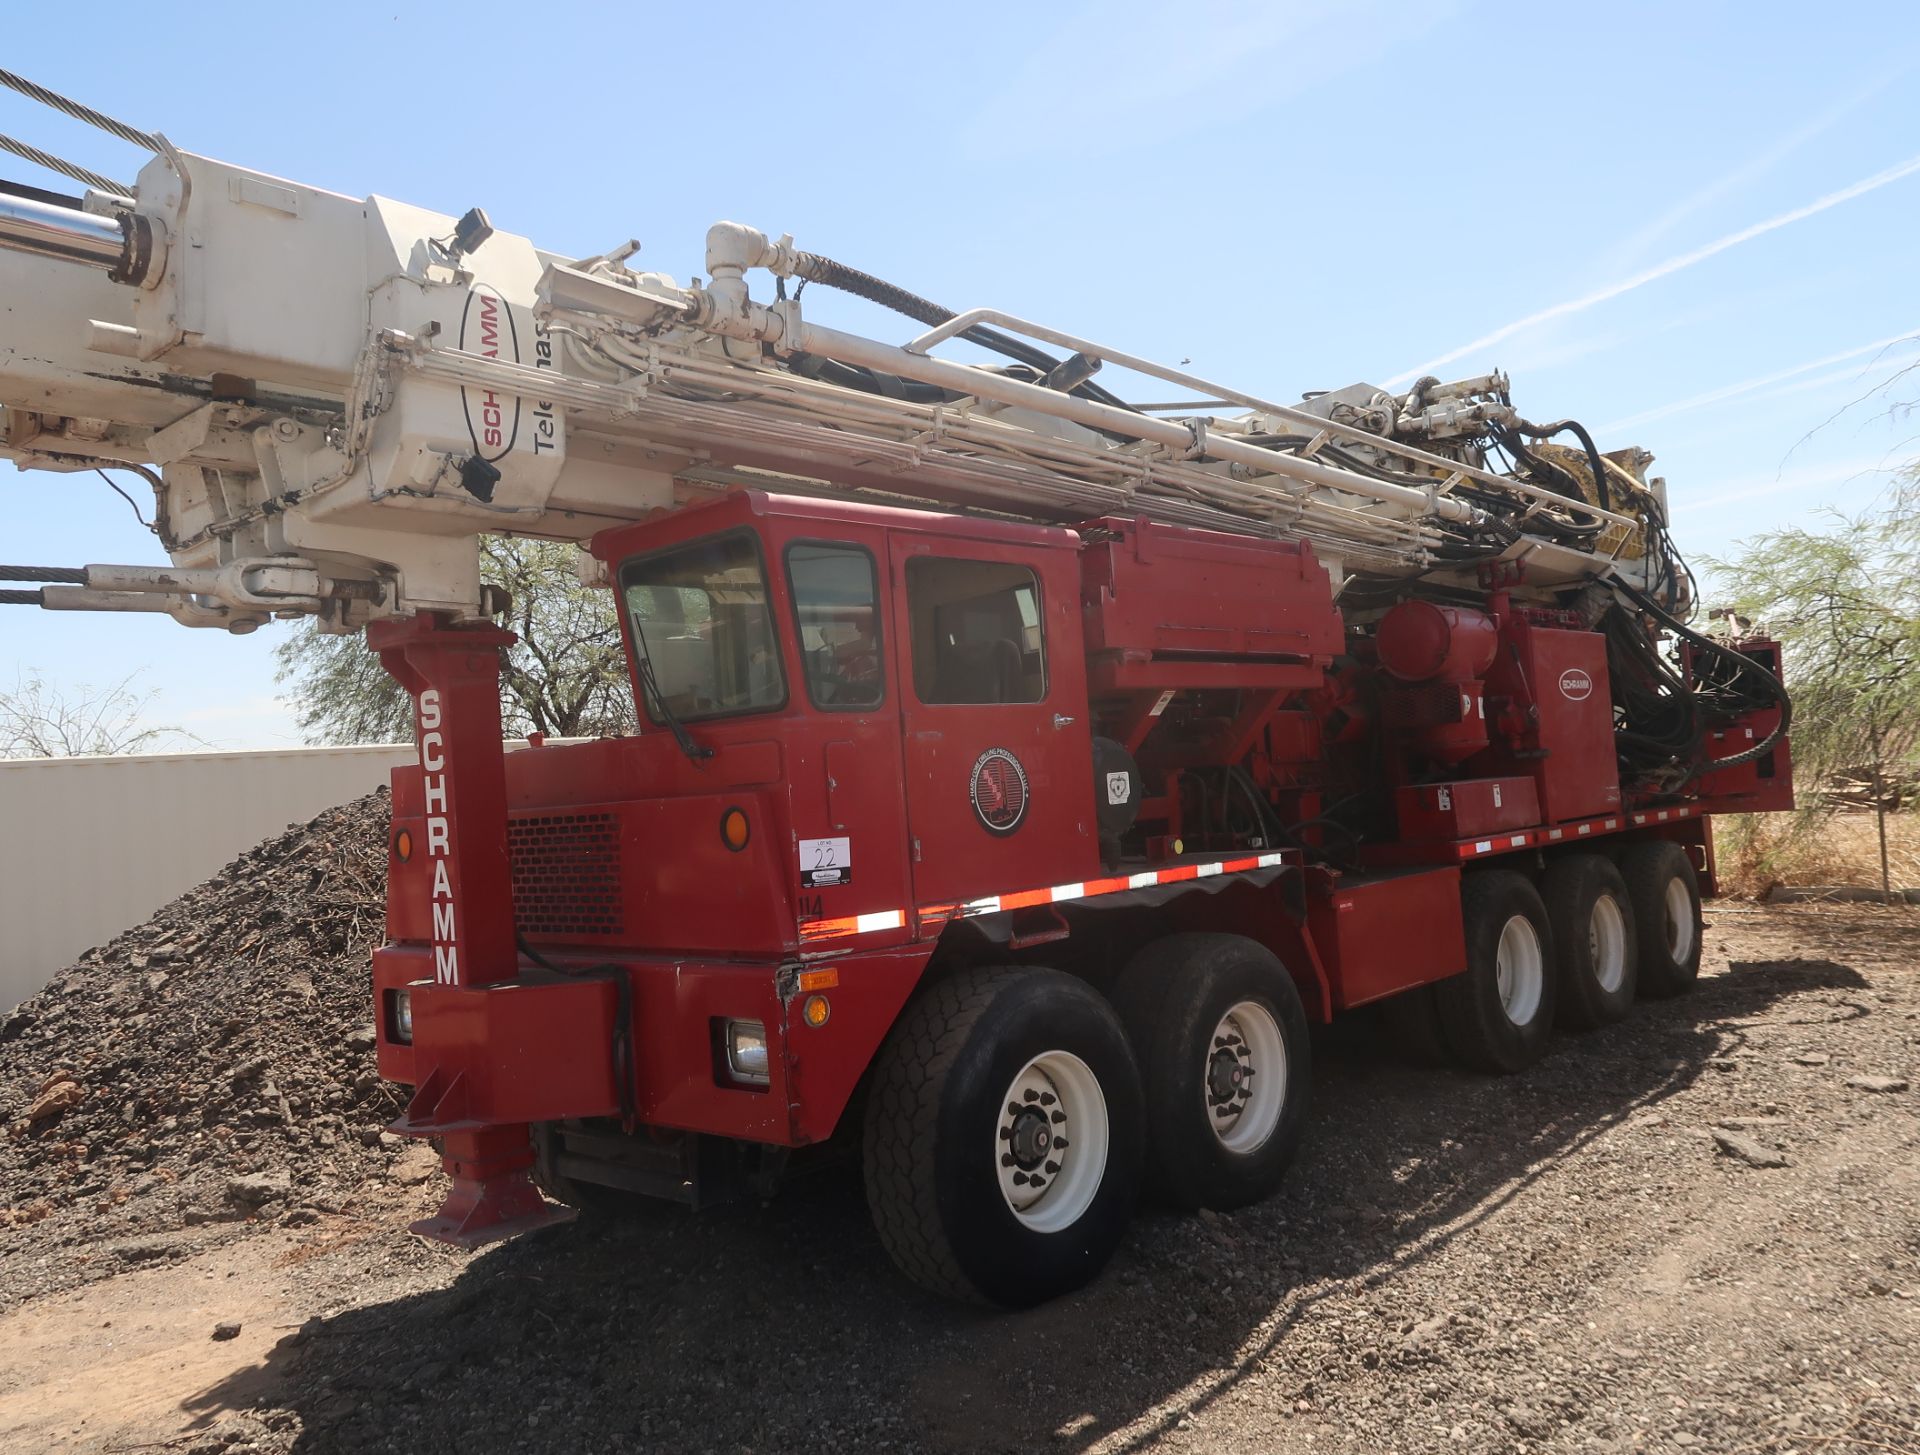 2006 SCHRAMM T-130XD DRILL RIG, SN. J130-0135 MOUNTED ON CRANE CARRIER, VIN. 1CYDGV6846T046987 - Image 2 of 18